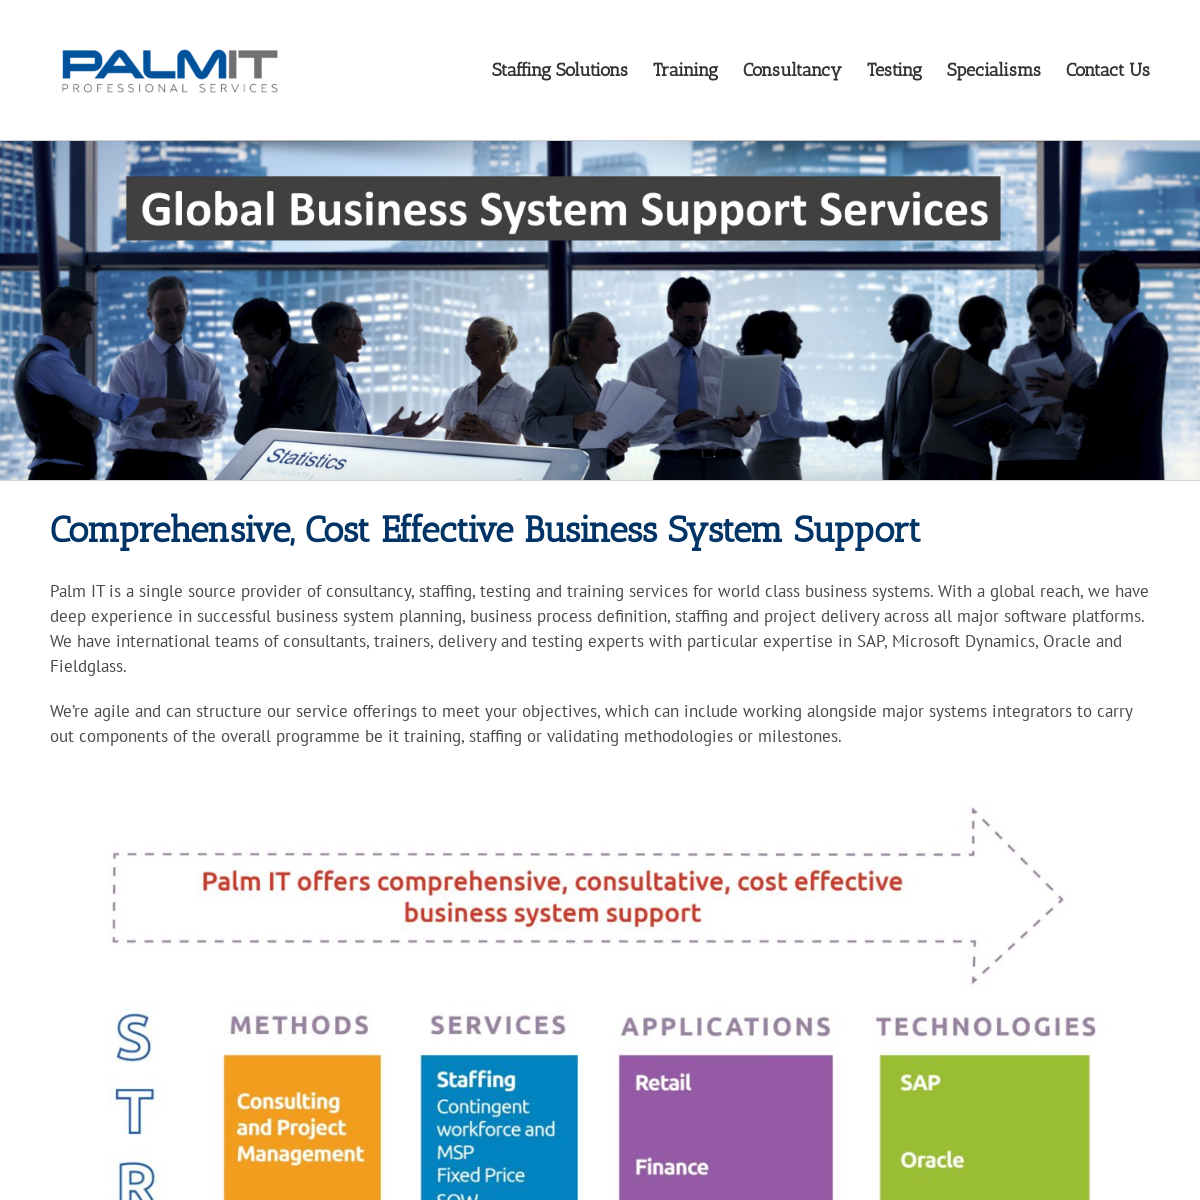 A complete backup of palmitservices.com